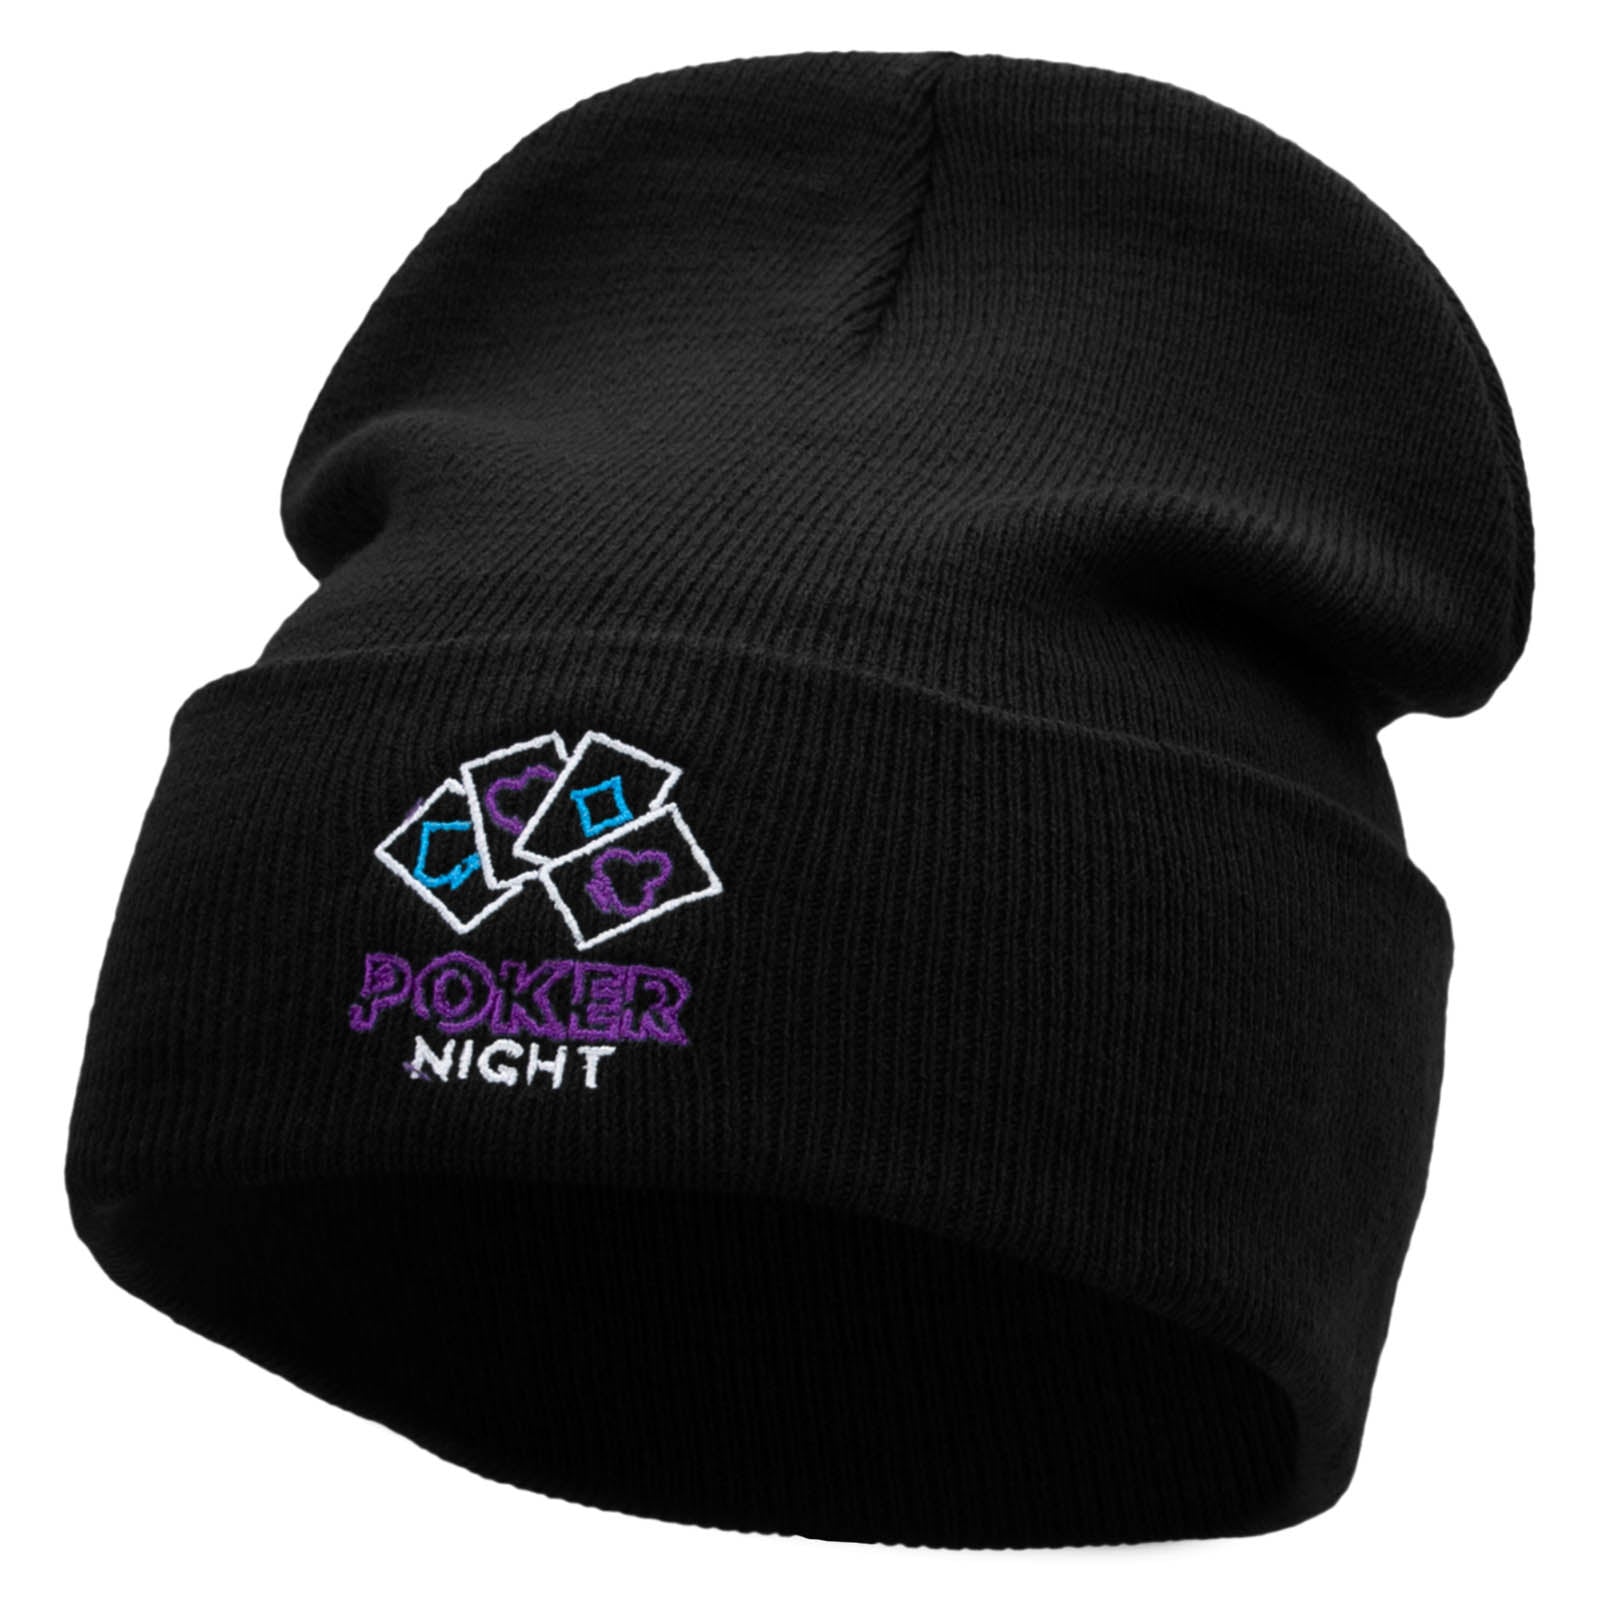 The Poker Night Embroidered 12 Inch Long Knitted Beanie - Black OSFM